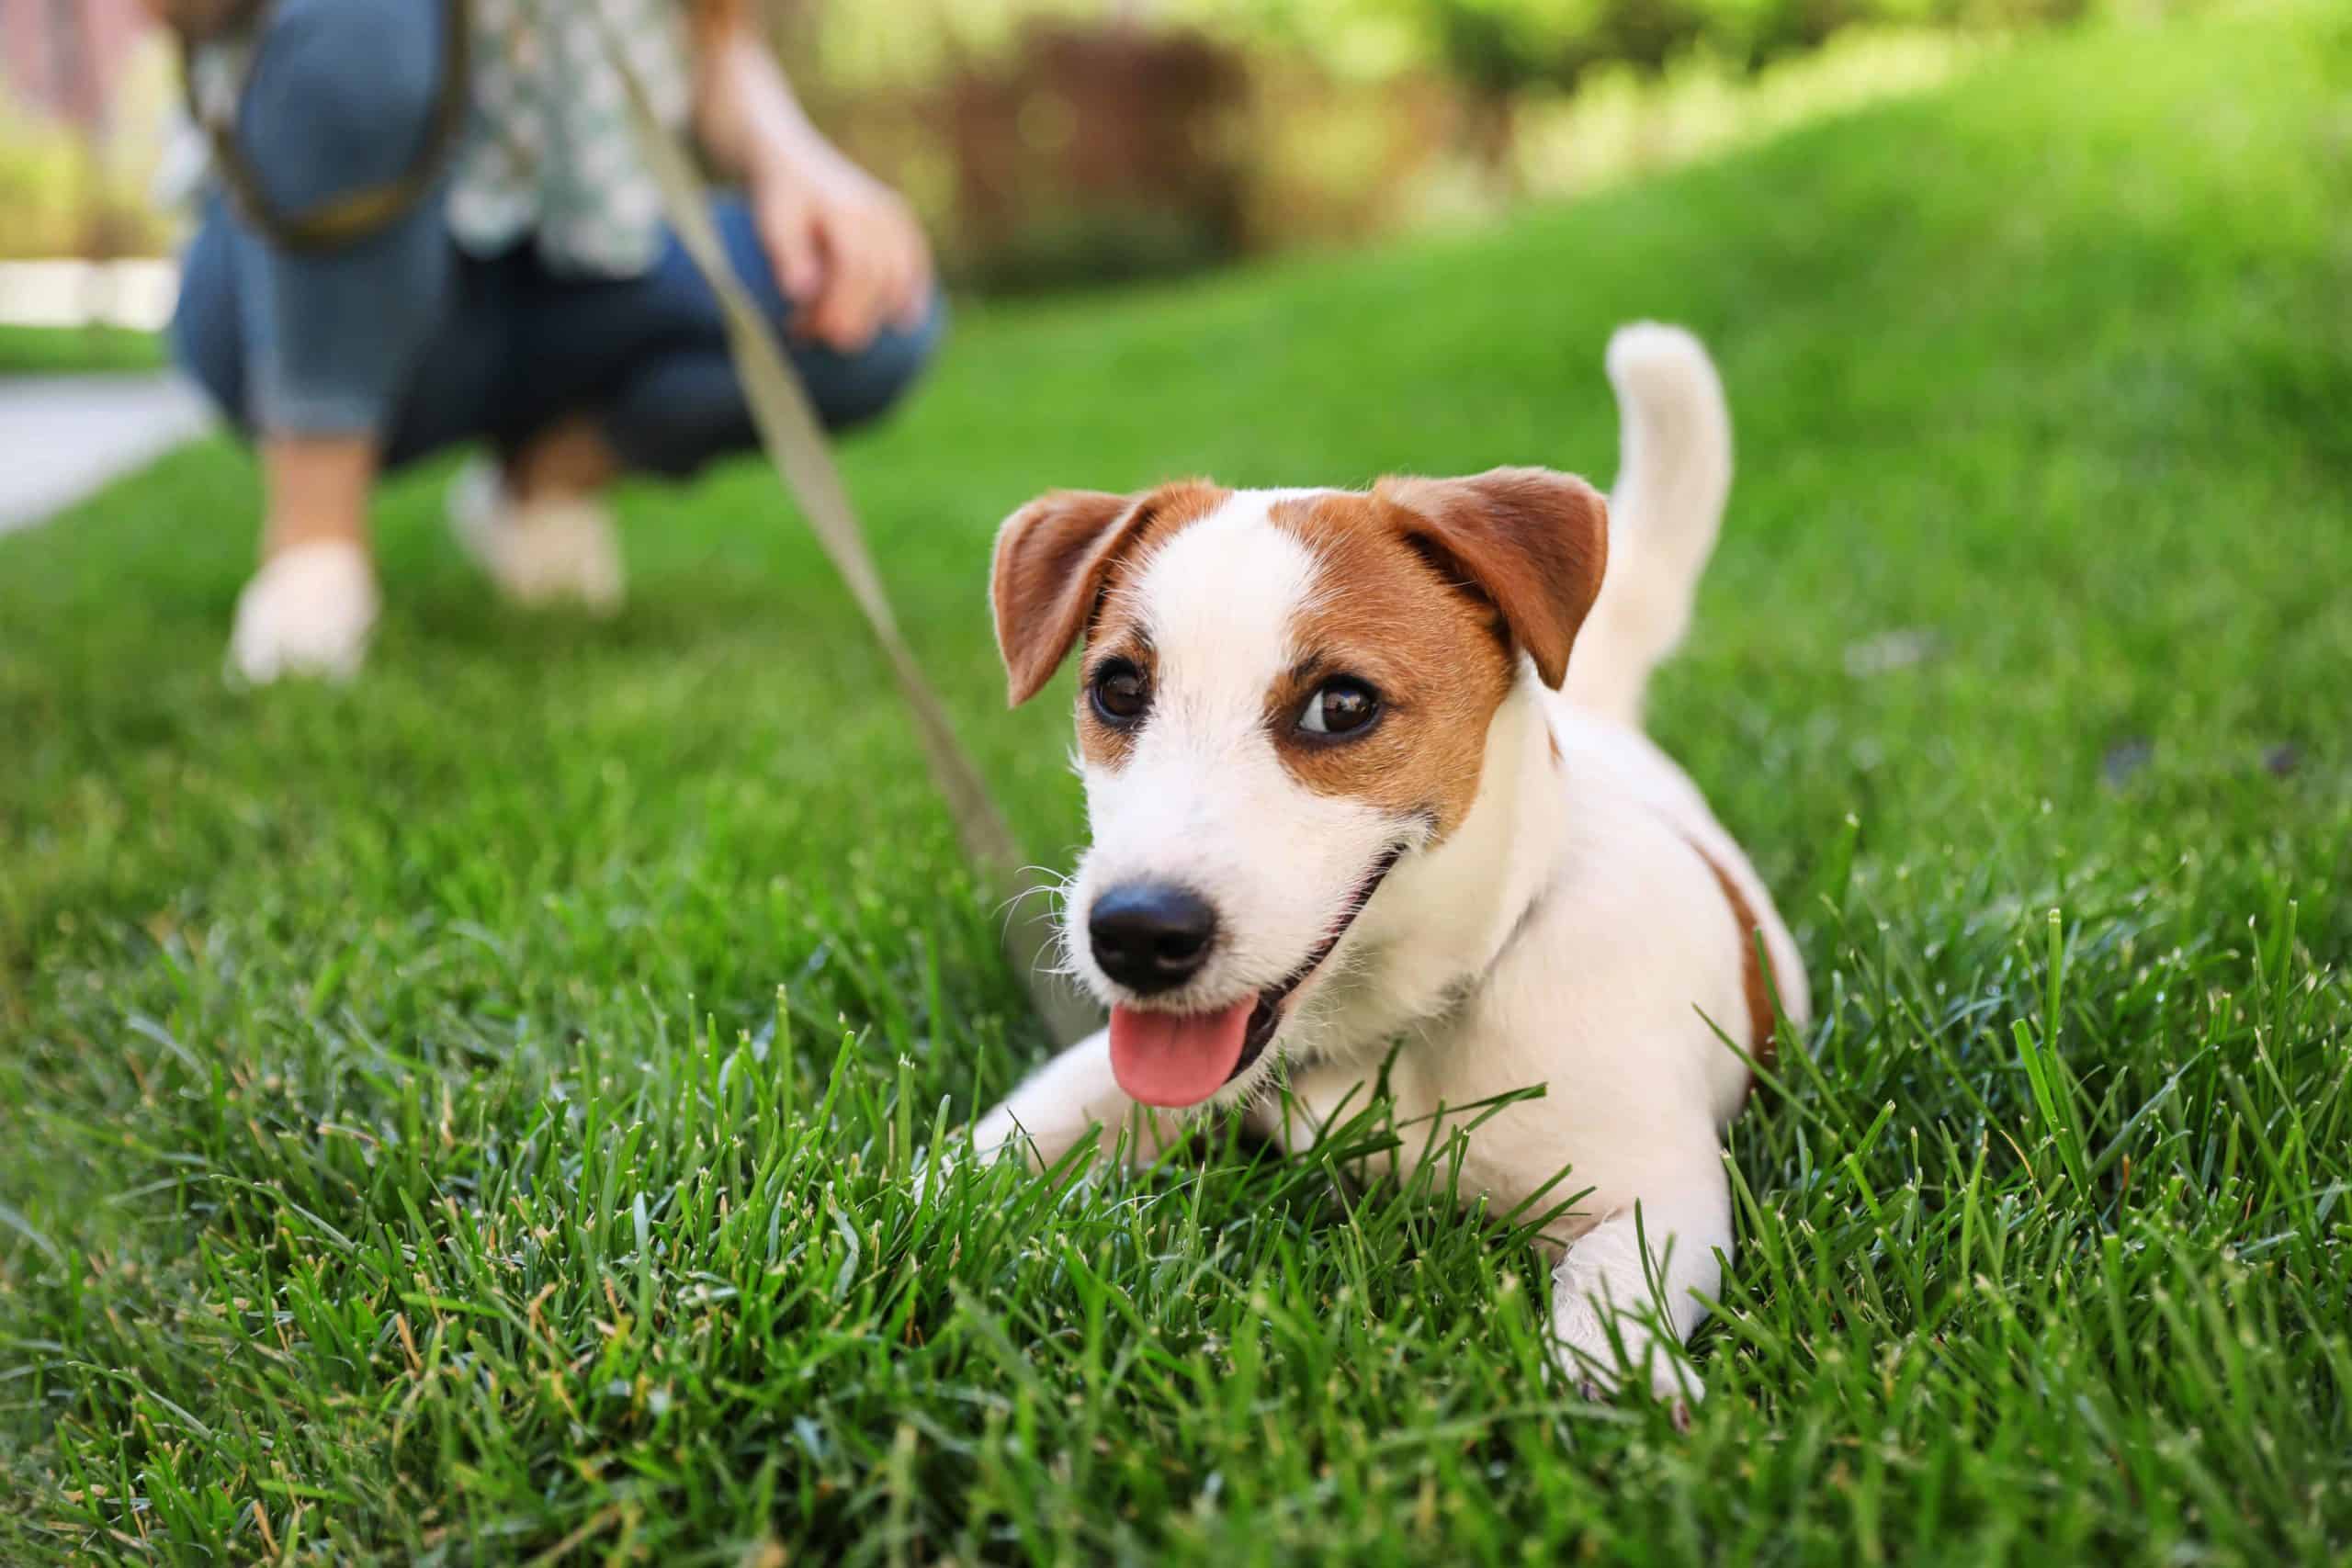 Happy Jack Russell with owner while on walk. As a responsible pet owner, you need to make sure your pet gets regular vet visits, is trained and socialized, and gets necessary medicine.